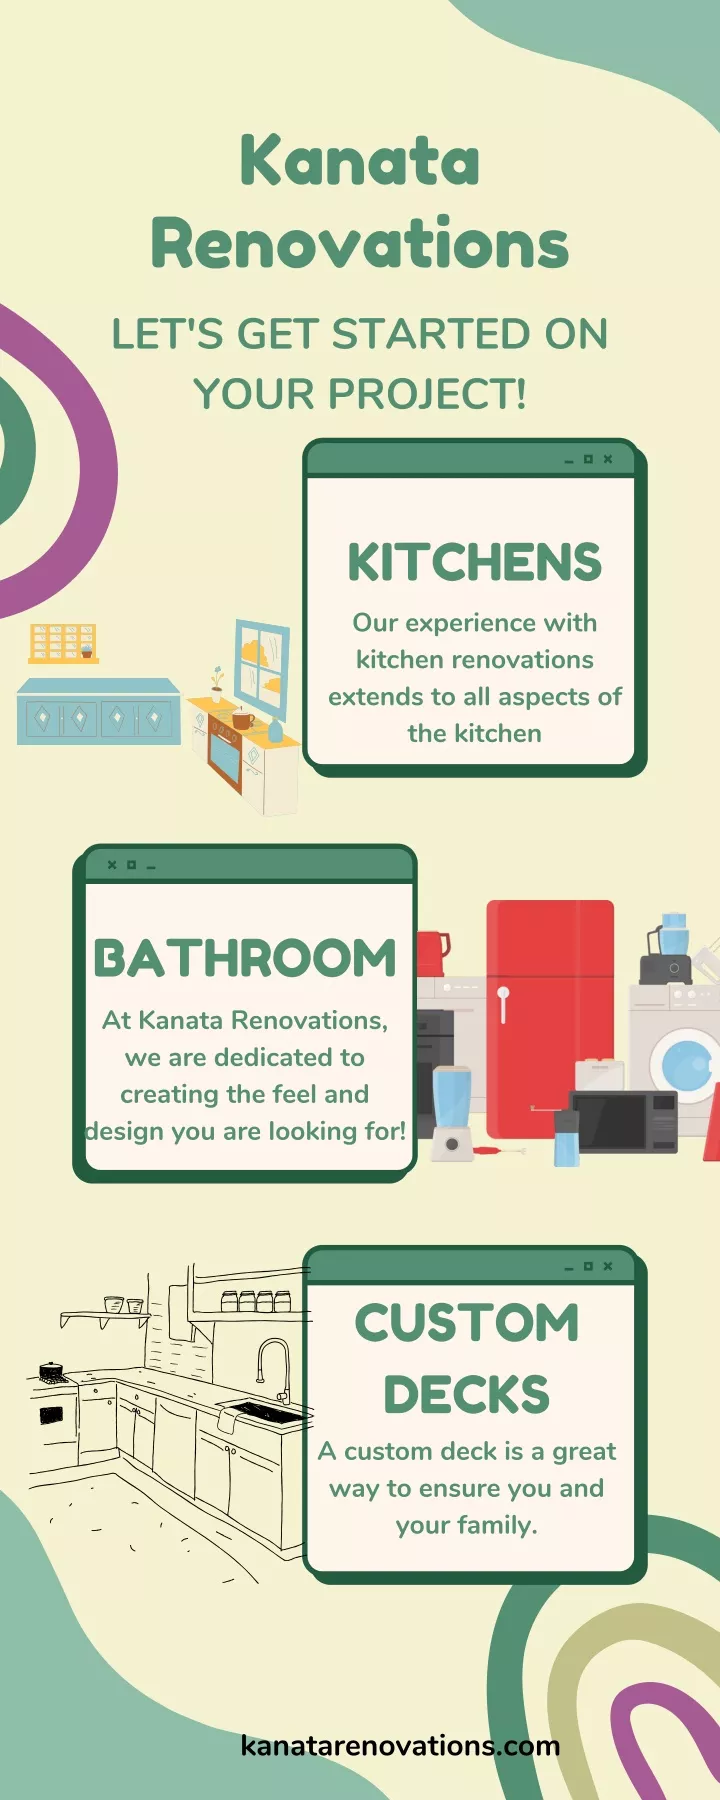 kanata renovations let s get started on your